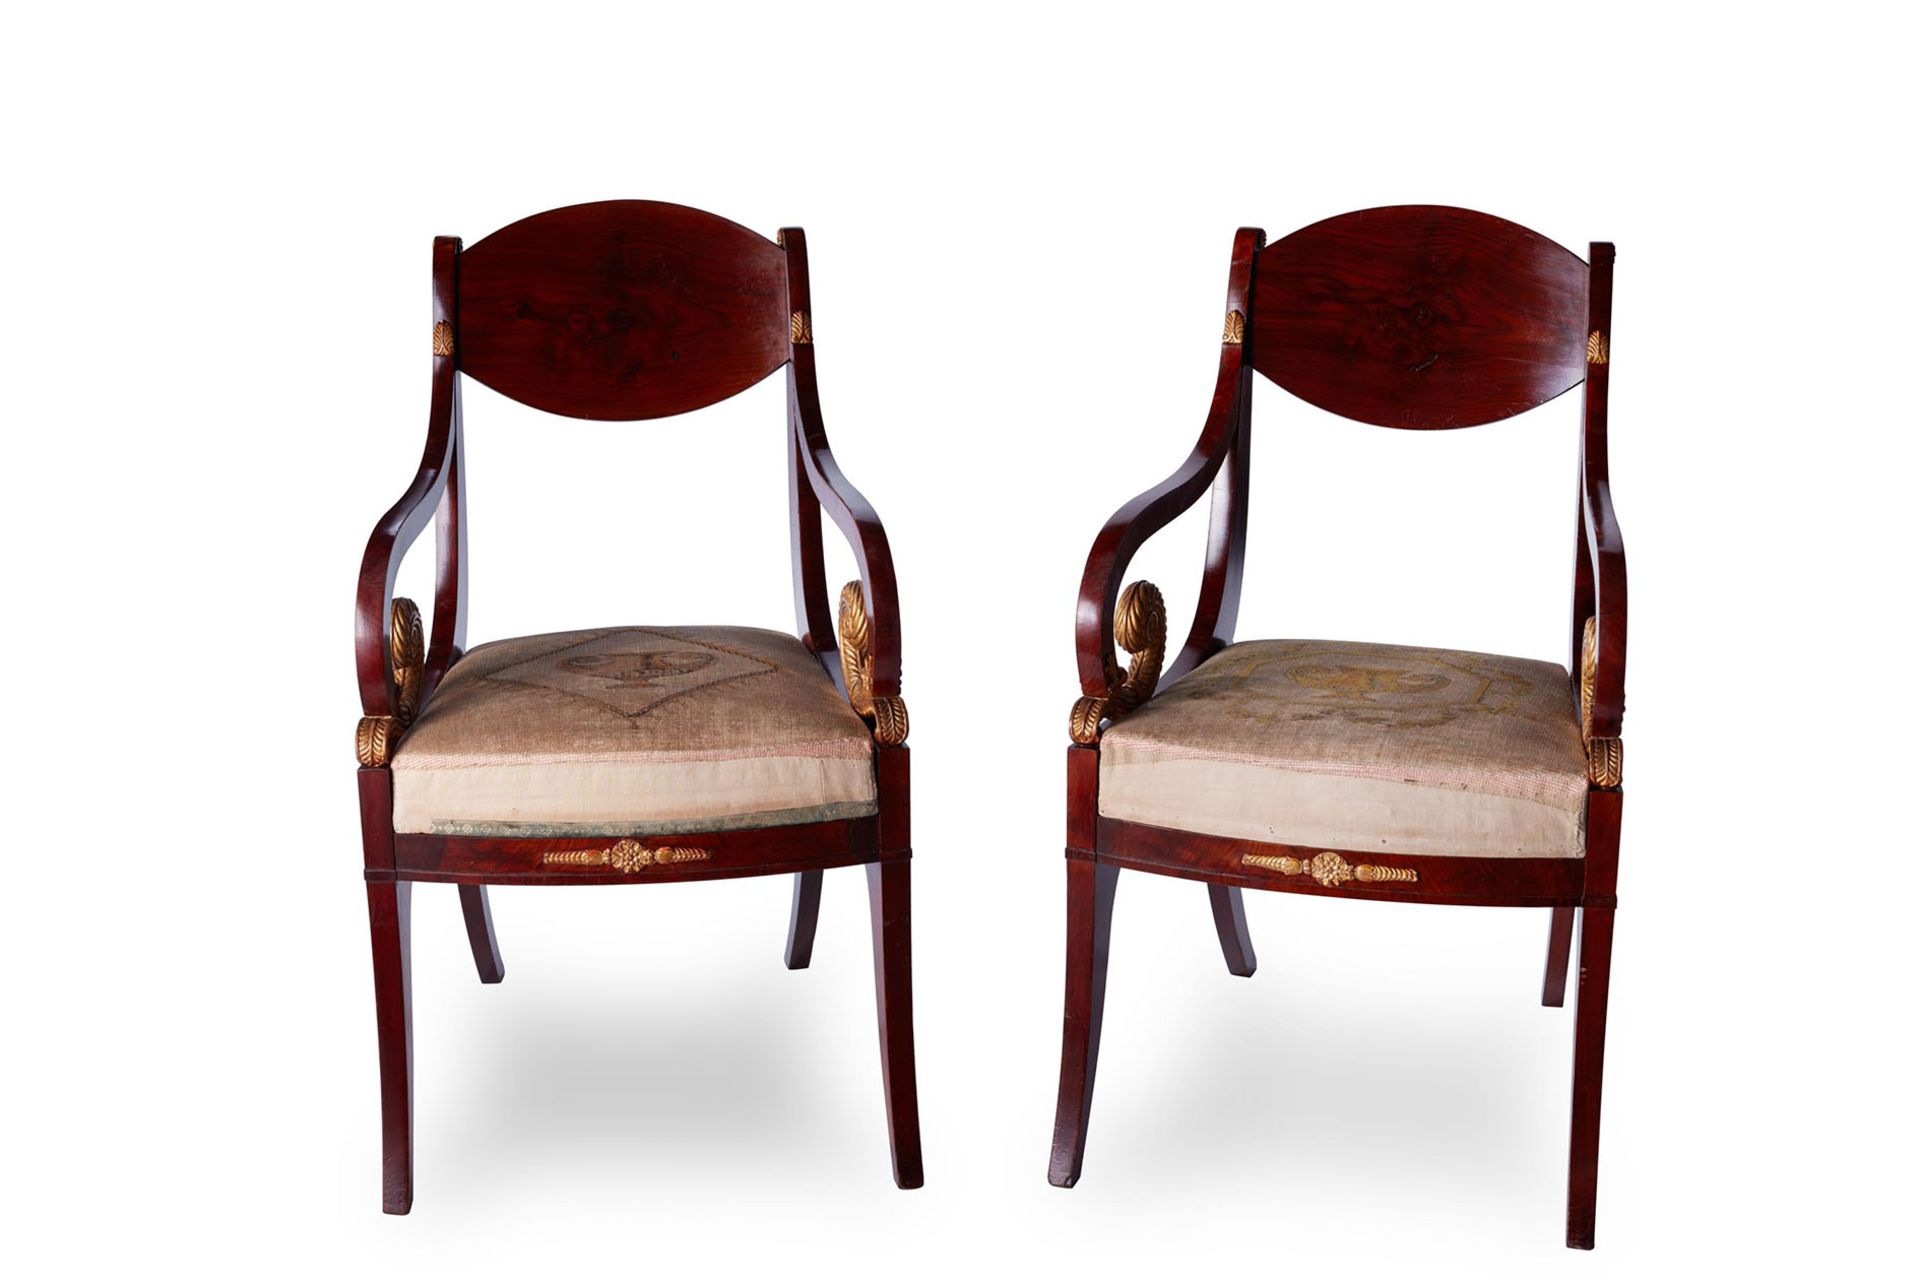 RARE PAIR OF ARMCHAIRS from the collection of the PAVLOVSKY PALACE - St. Petersburg, [...]